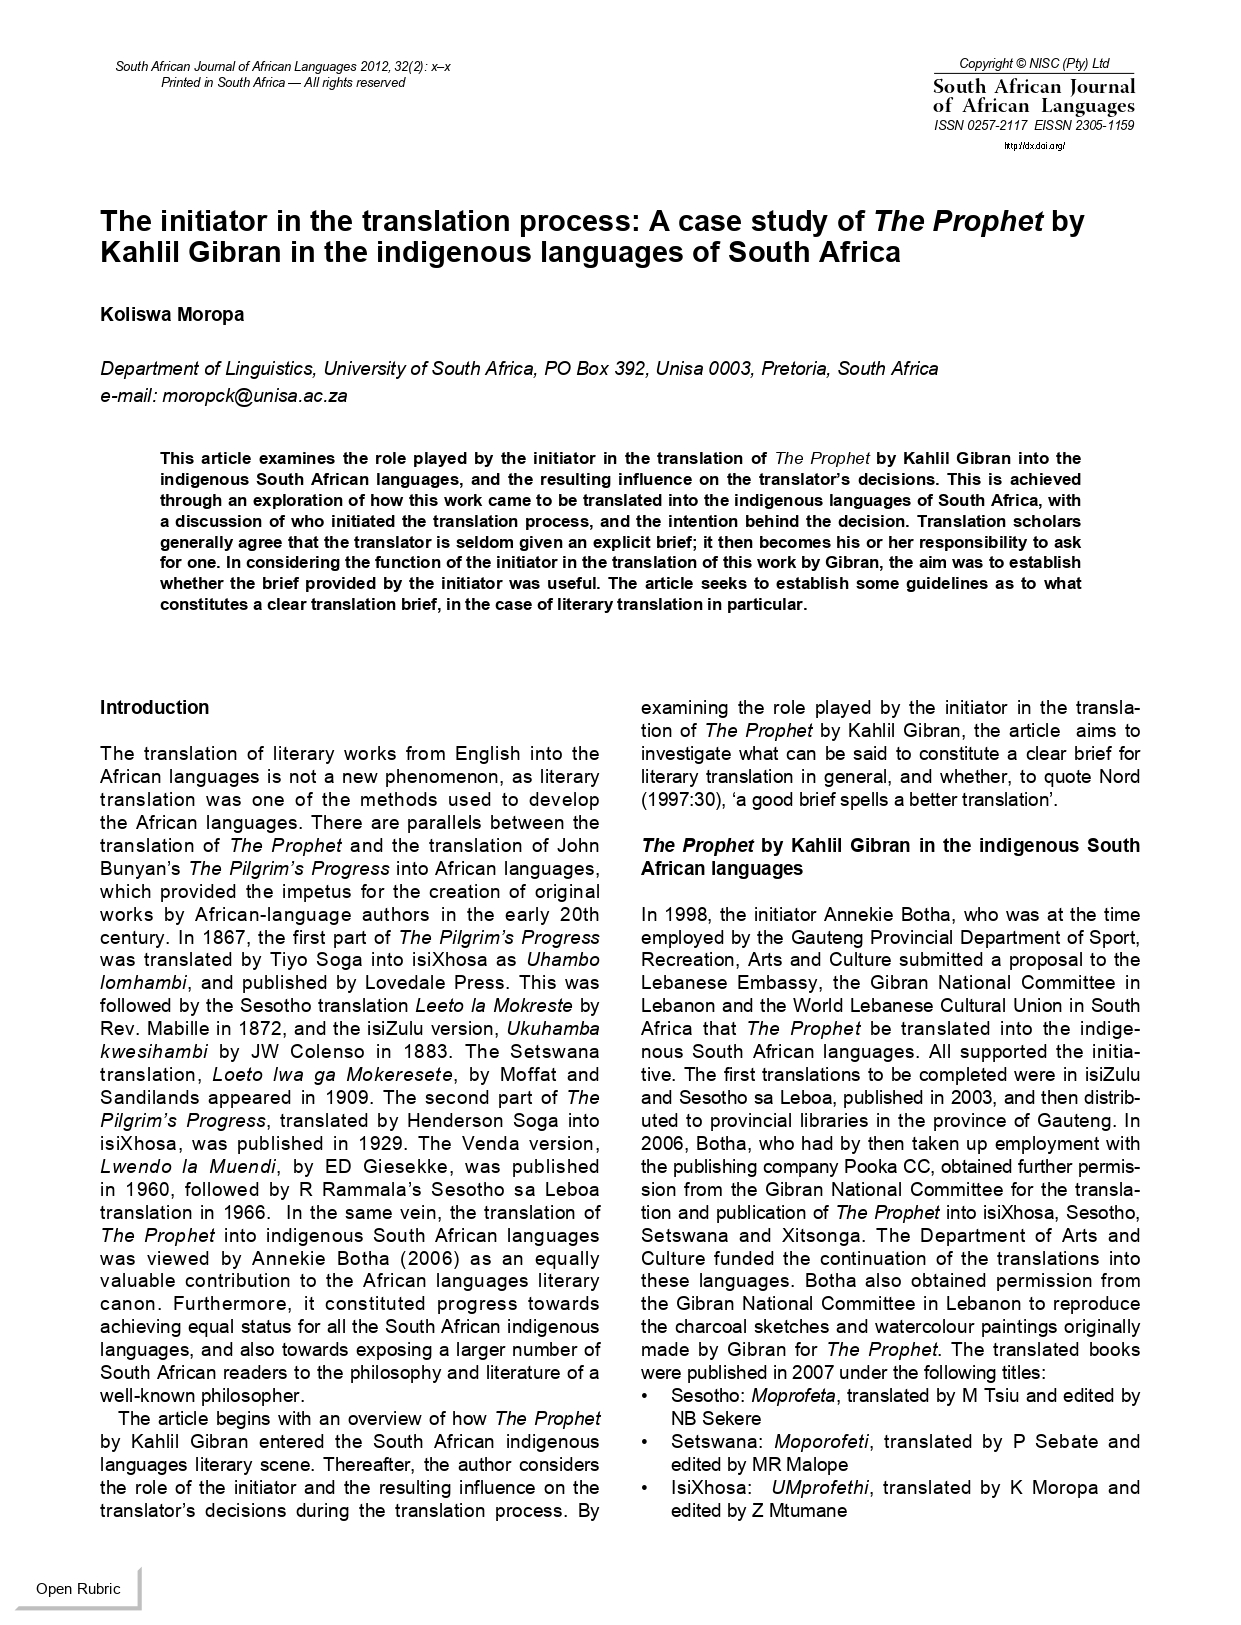 Koliswa Moropa, "The initiator in the translation process: A case study of The Prophet by Kahlil Gibran in the indigenous languages of South Africa", South African Journal of African Languages, Volume 32, Issue 2, 2012, pp. 99-109. 